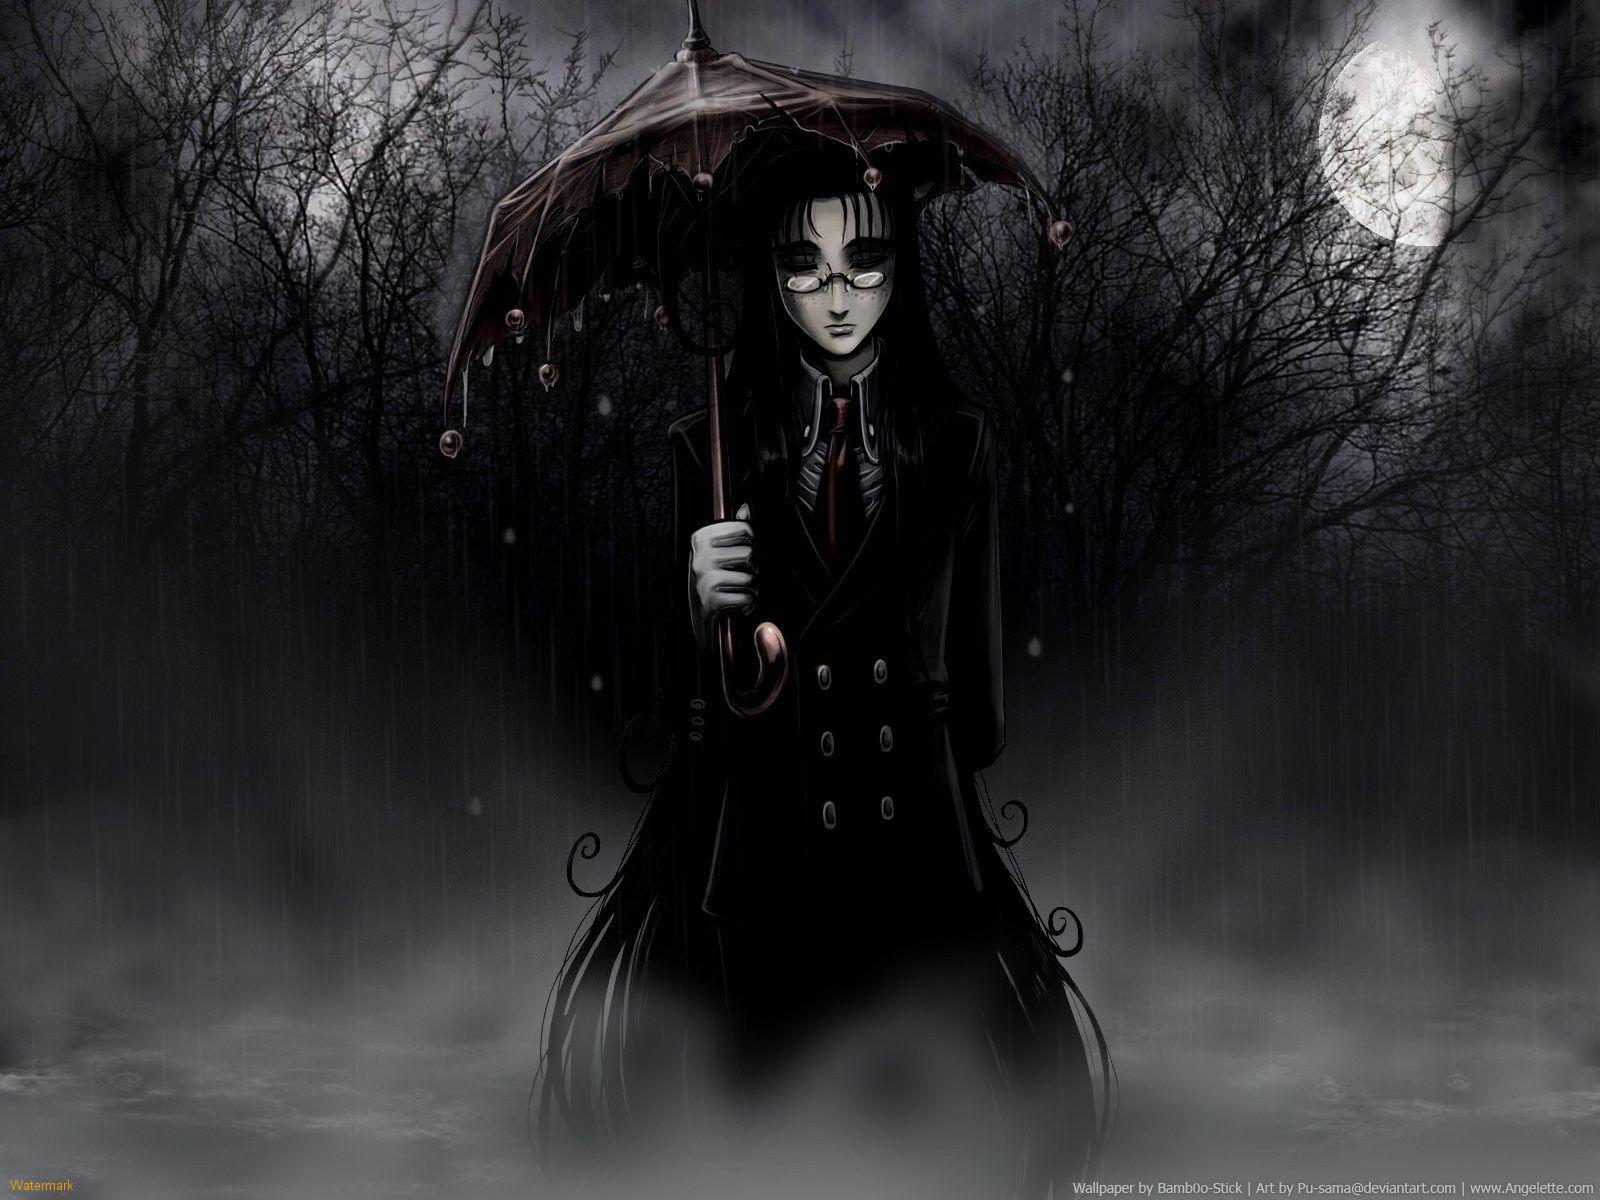 Anime Rainy Gothic Wallpaper Desktop Computer,Gadget and other